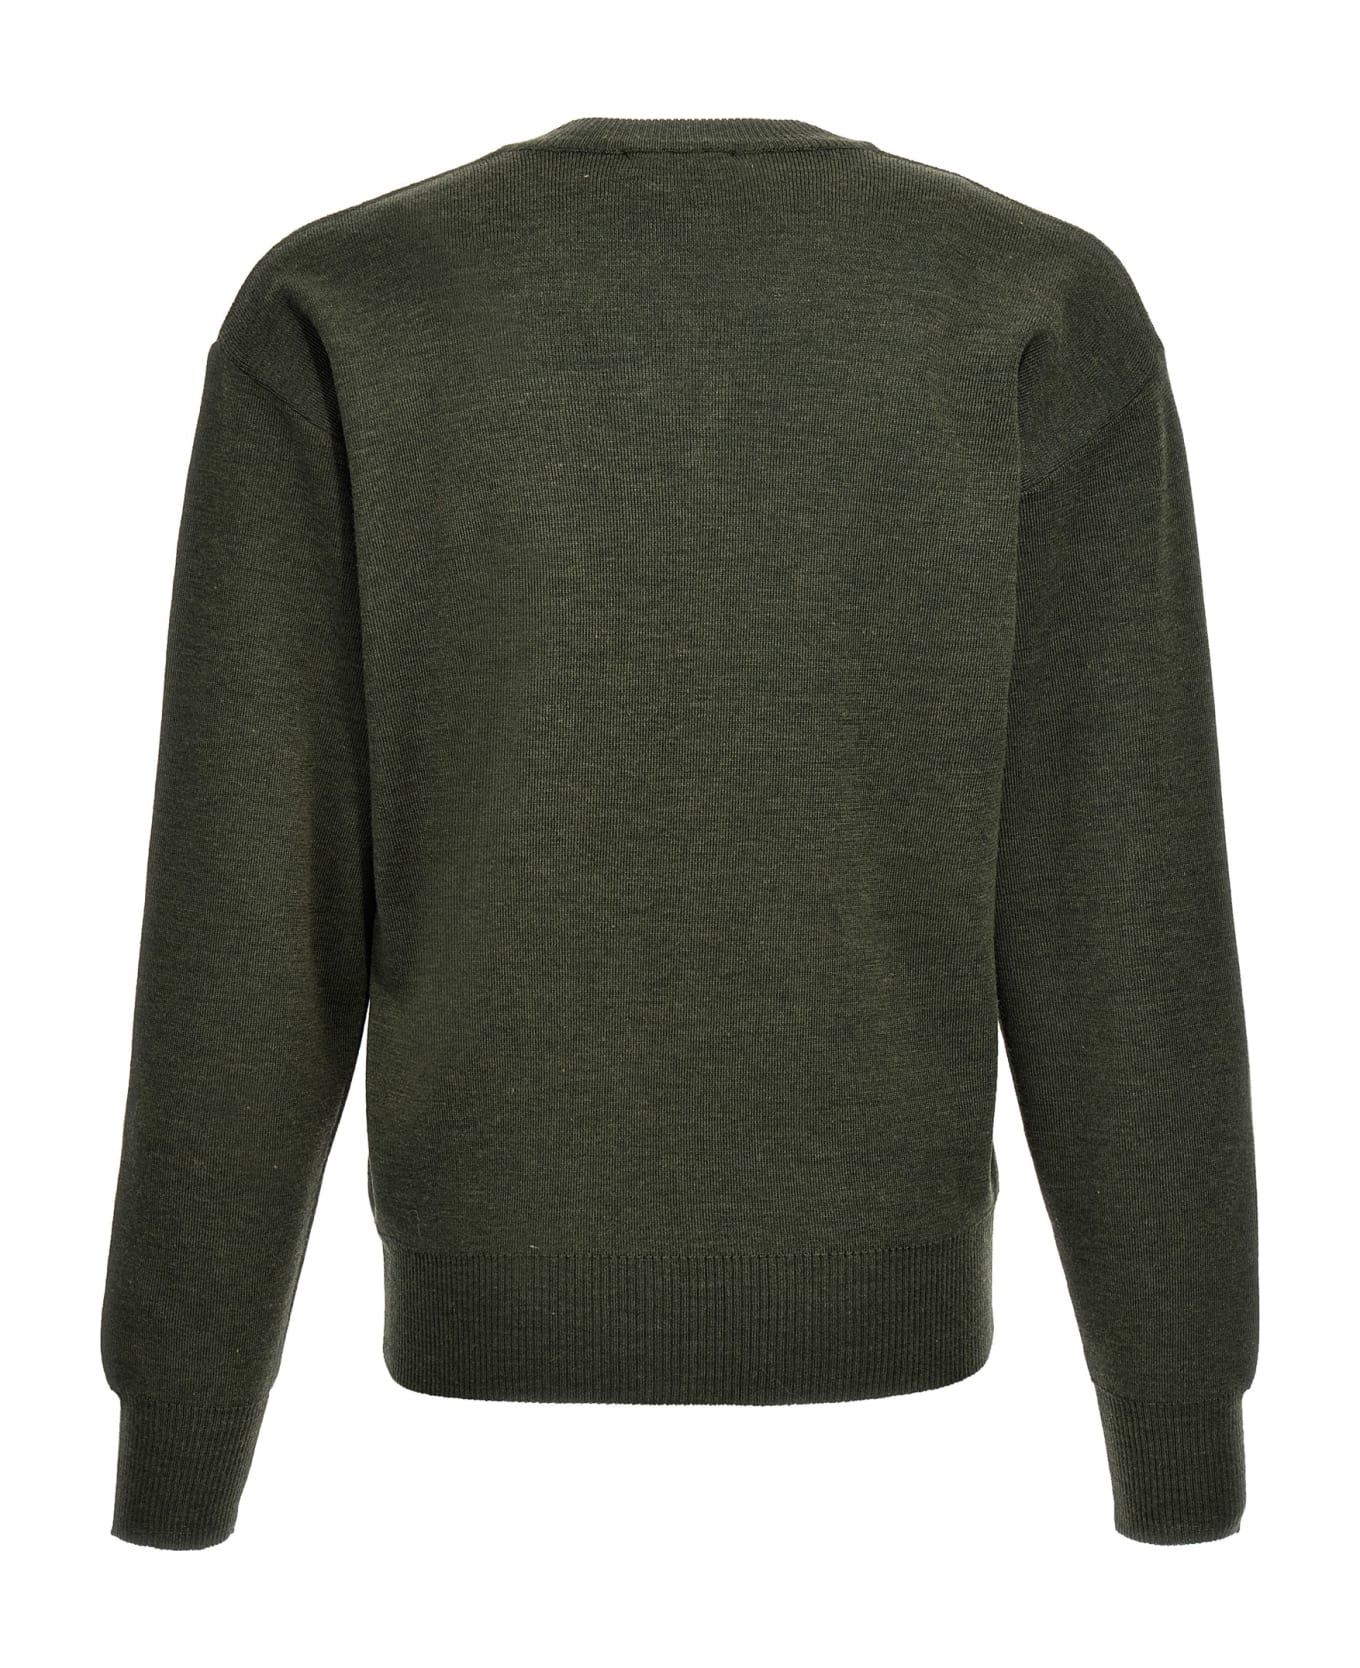 Lemaire V-neck Sweater - Ivy Green